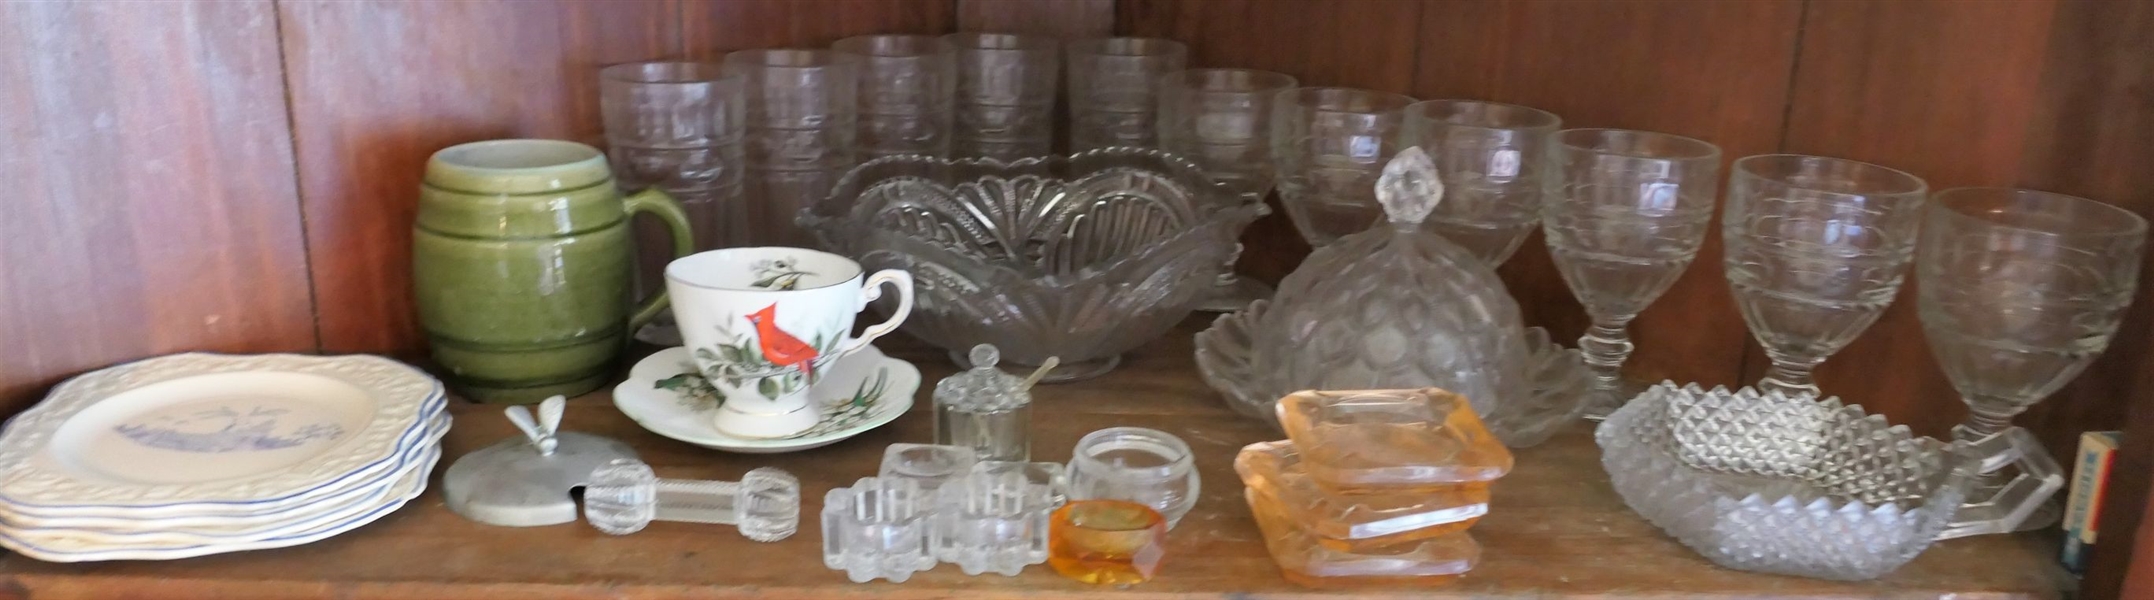 Shelf Lot including Glassware, Cruets, Butter Dish, Early American Press Glass, and Knife Rest